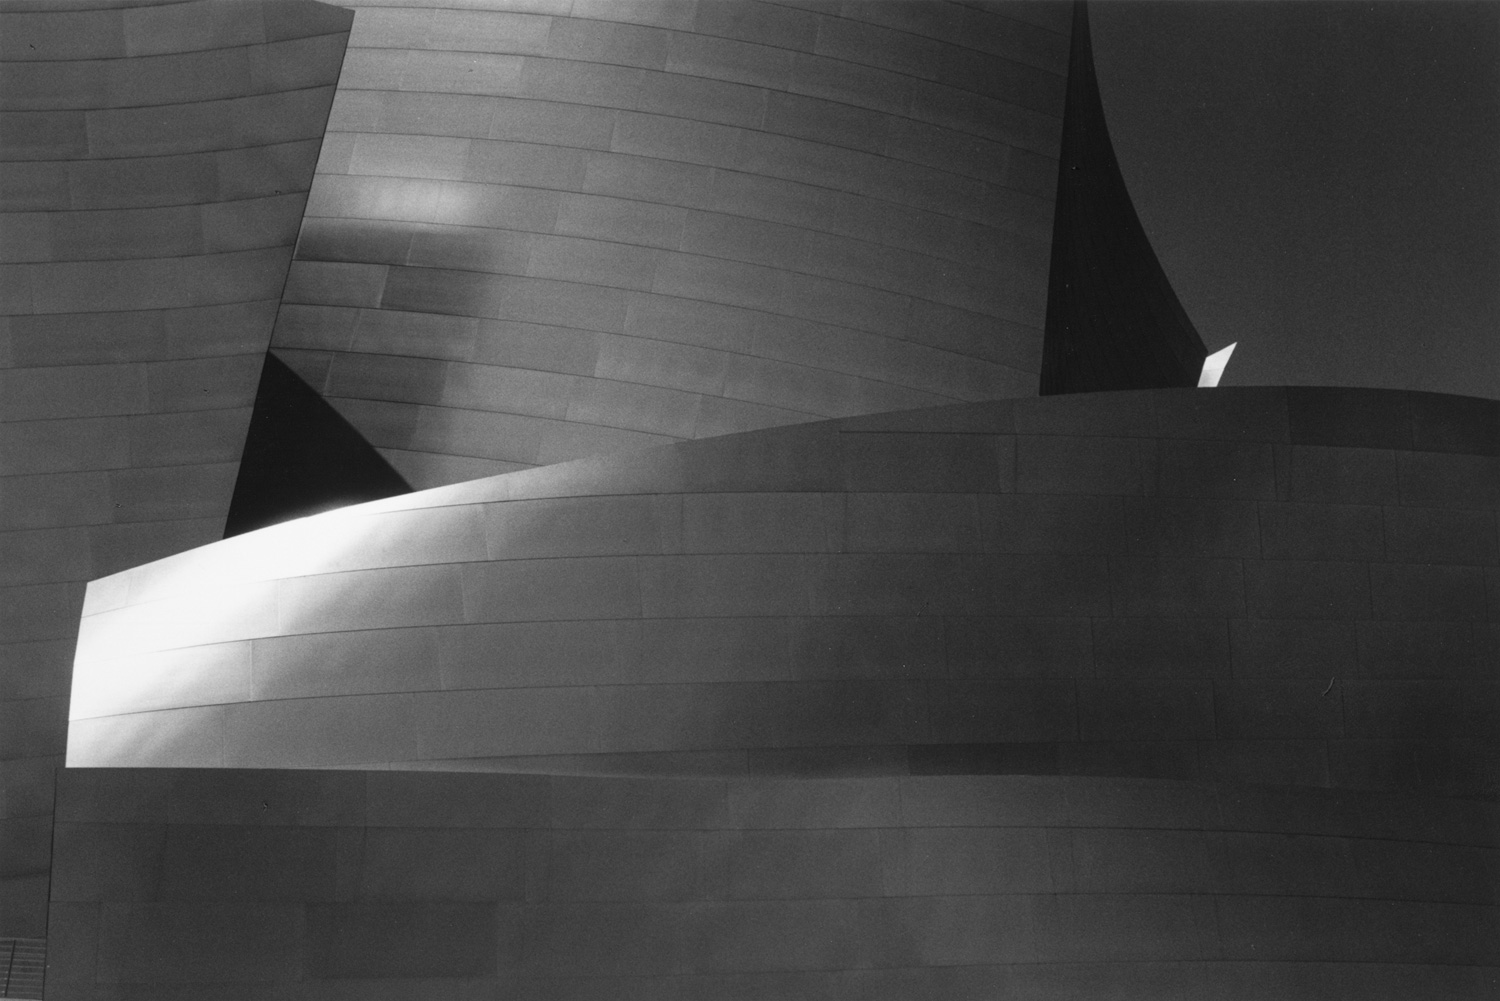 Frank Gehry’s Vision II